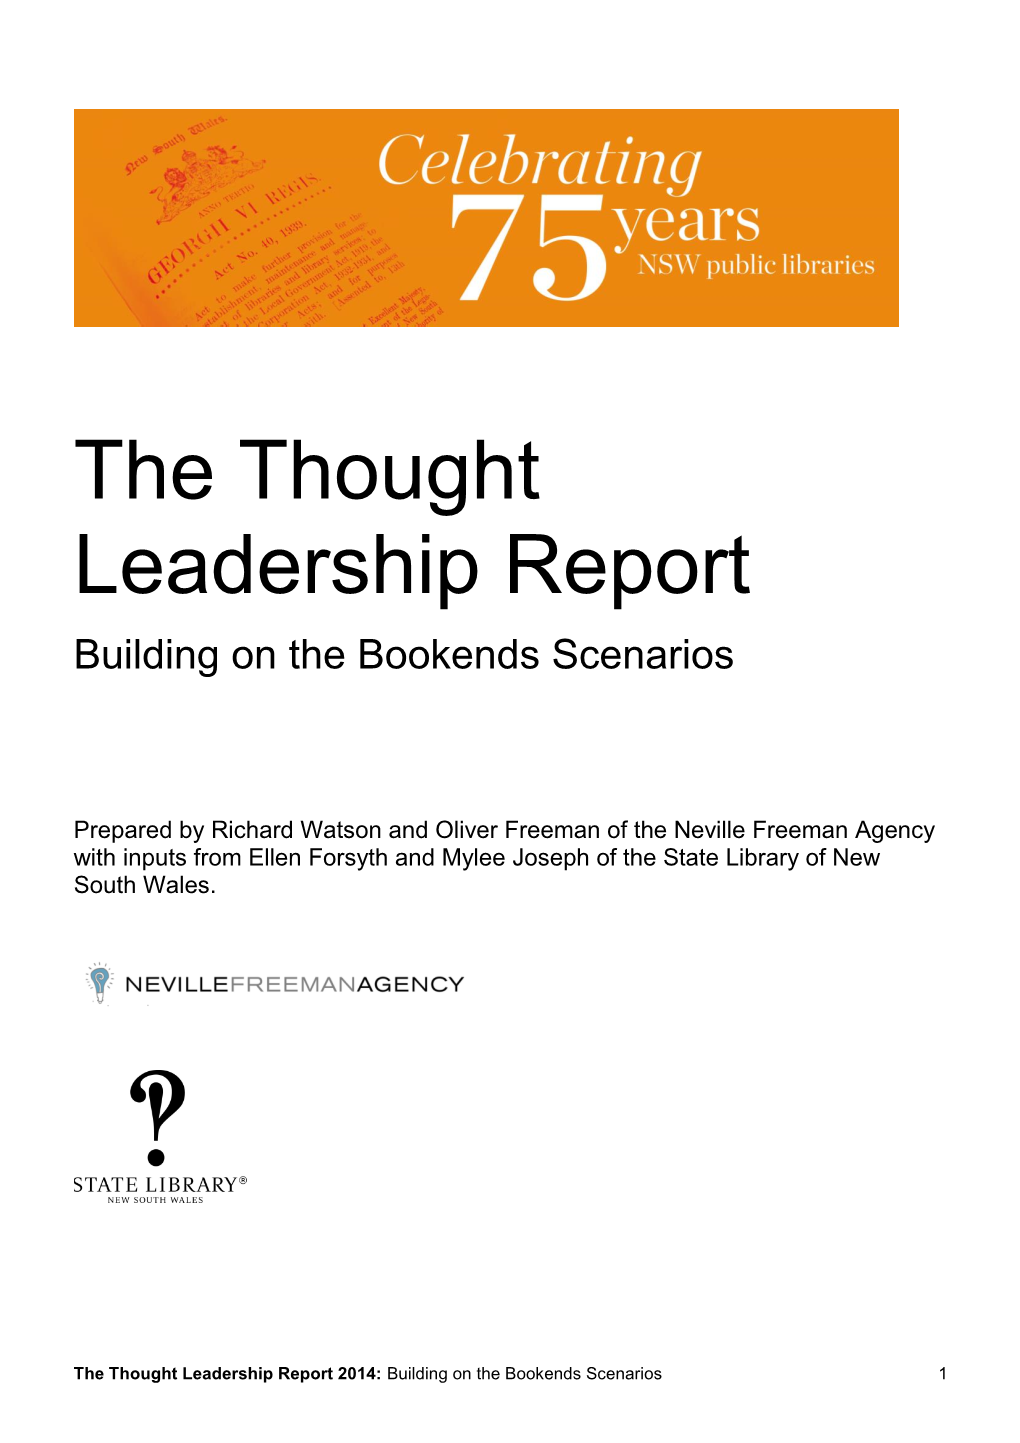 Thought Leadership Report, Building on the Bookend Scenarios